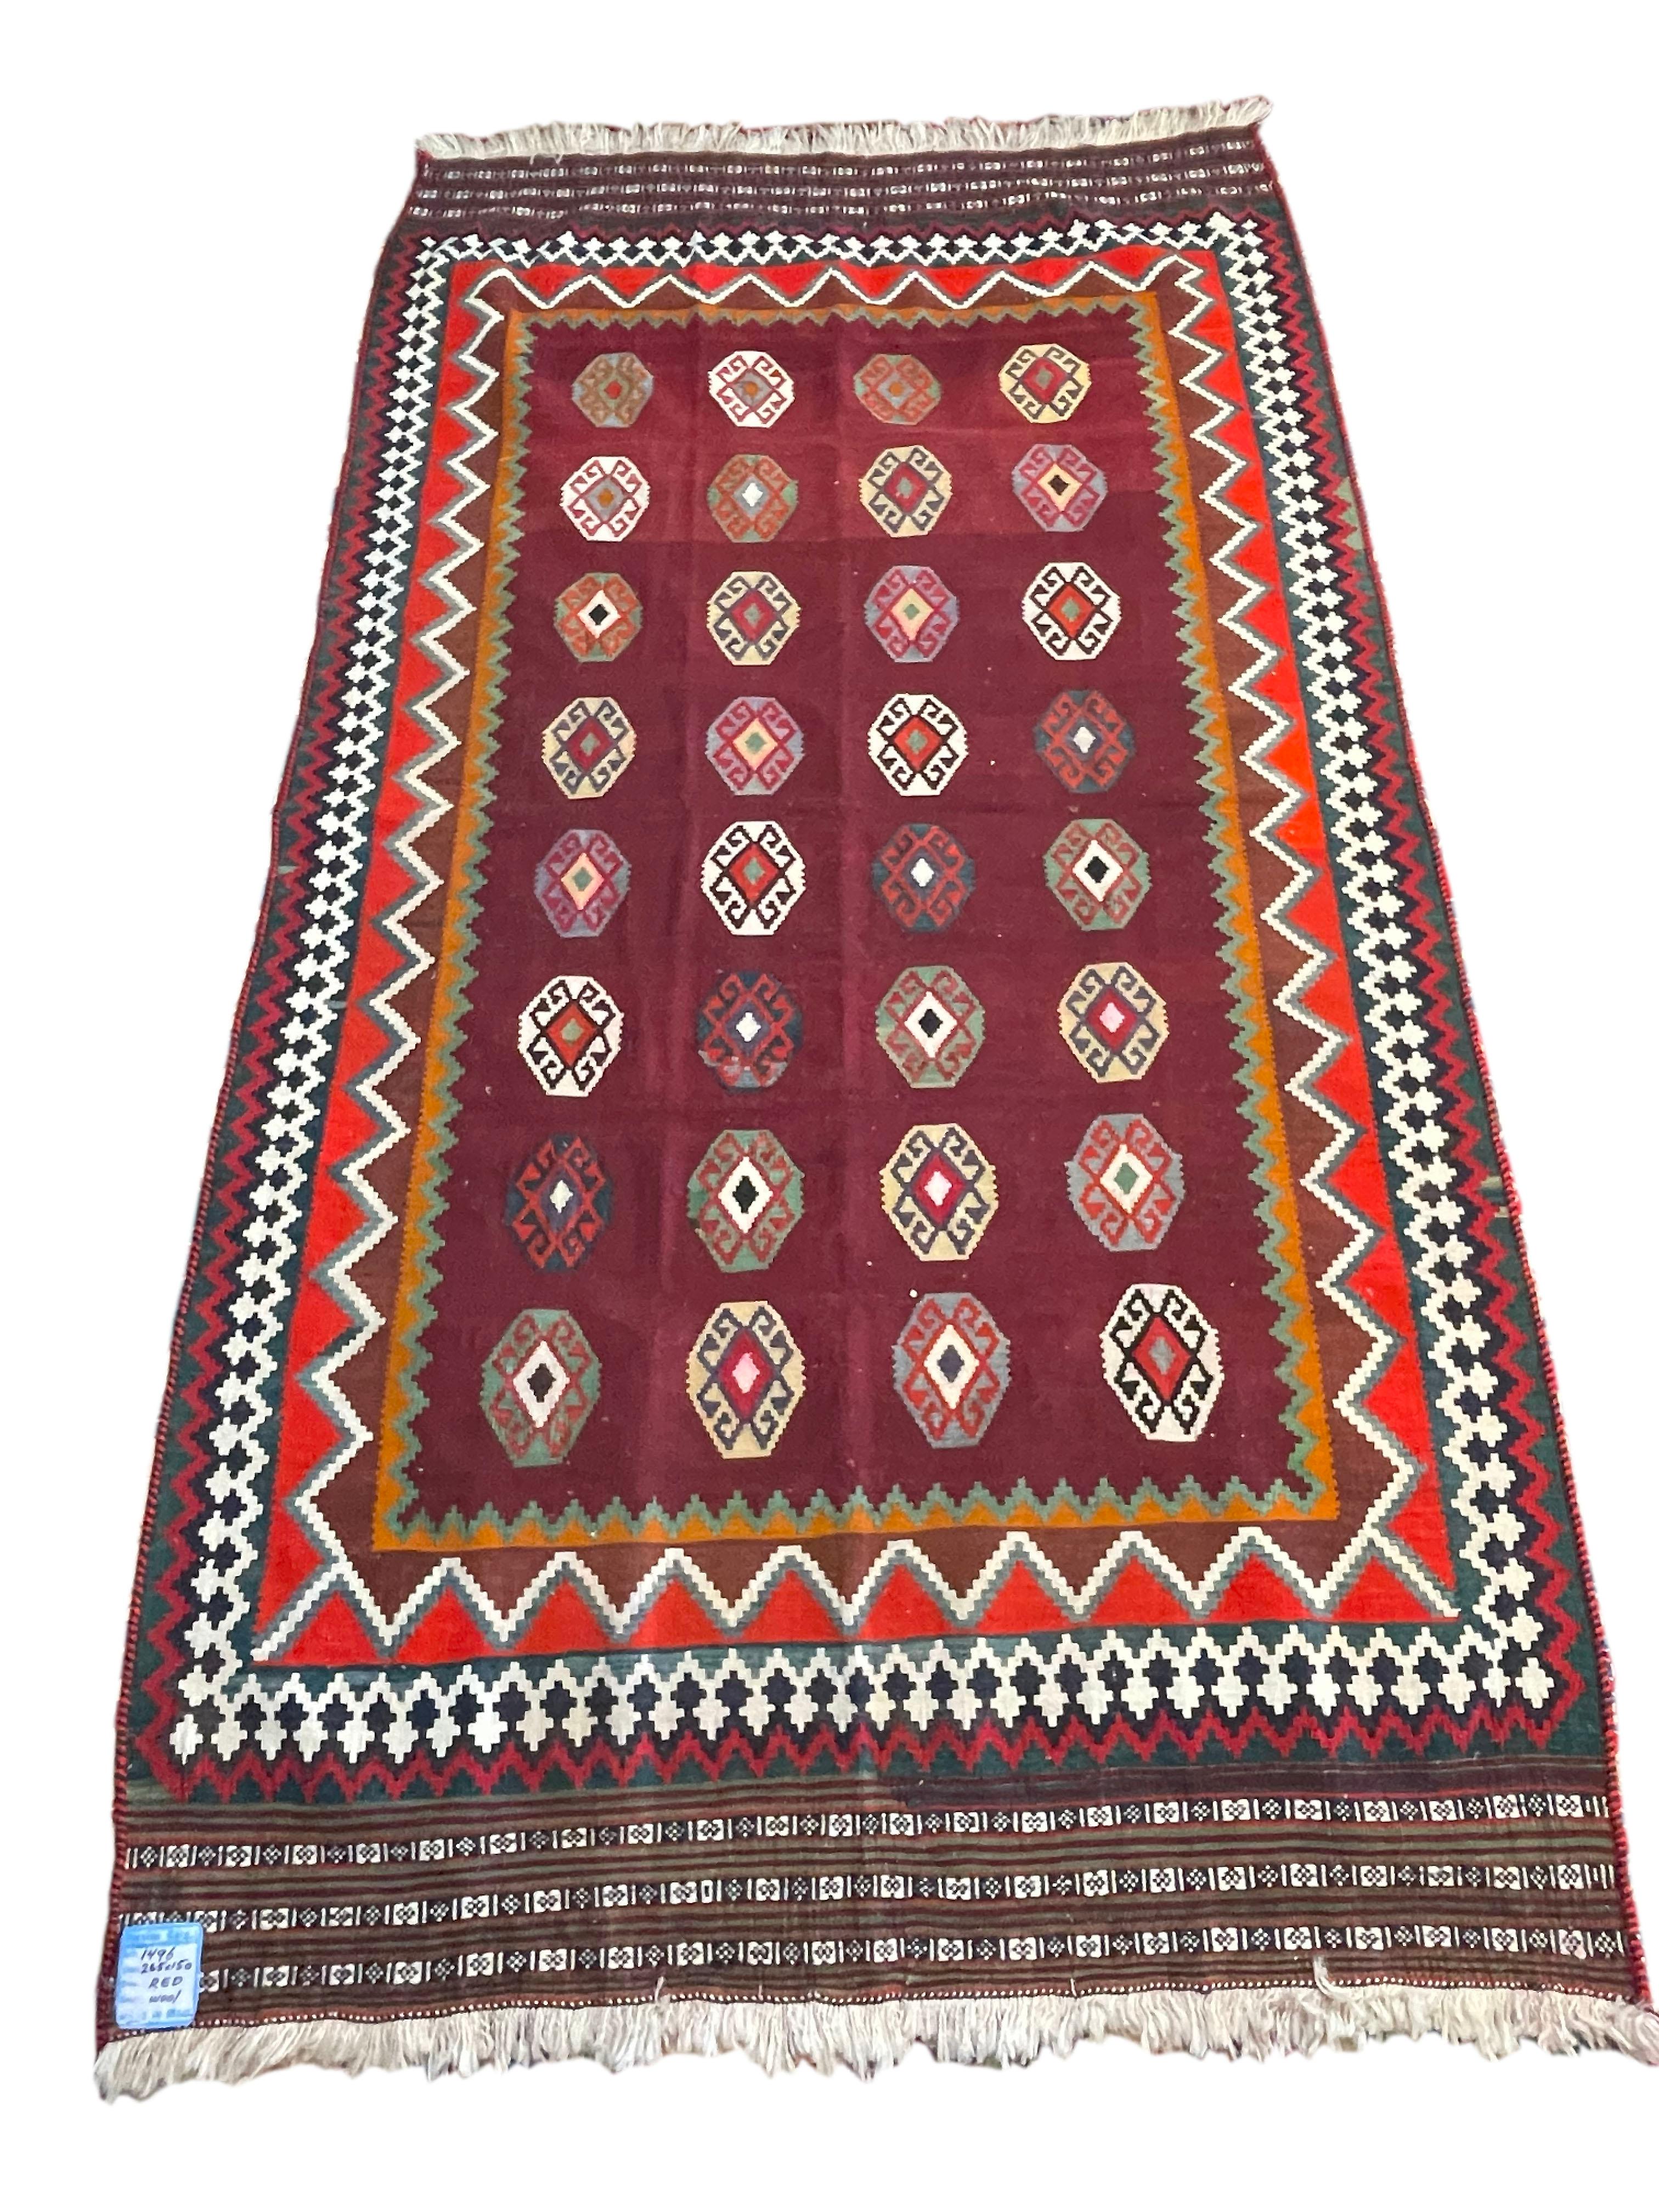 Vibrant 60's Kashkooli Kilim. This beautiful piece is 100% tightly woven, naturally dyed wool. The Kashkooli subtribe of the Qashqai's weave the finest, most intricate tribal rugs in the world. These bright colors and complex borders are a dead give